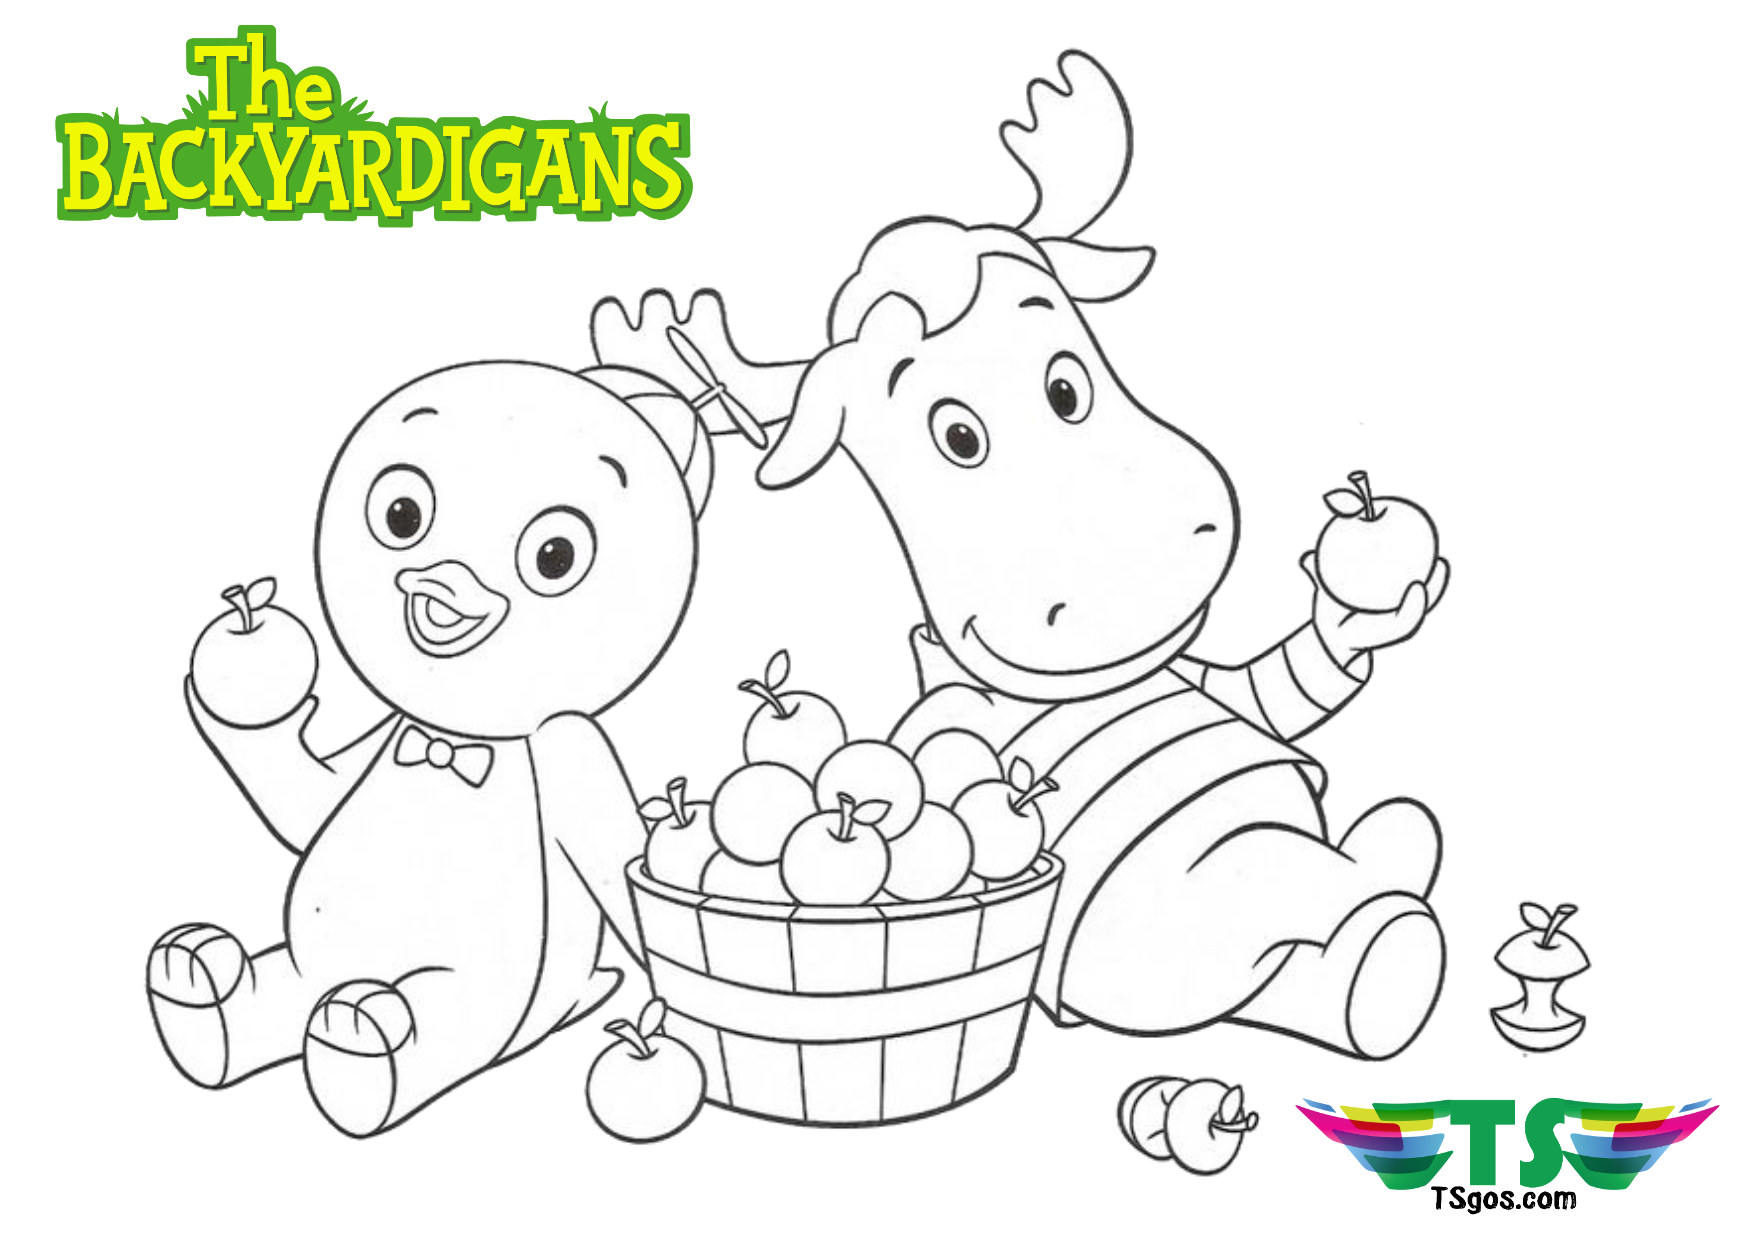 The Backyardigans coloring page. Wallpaper